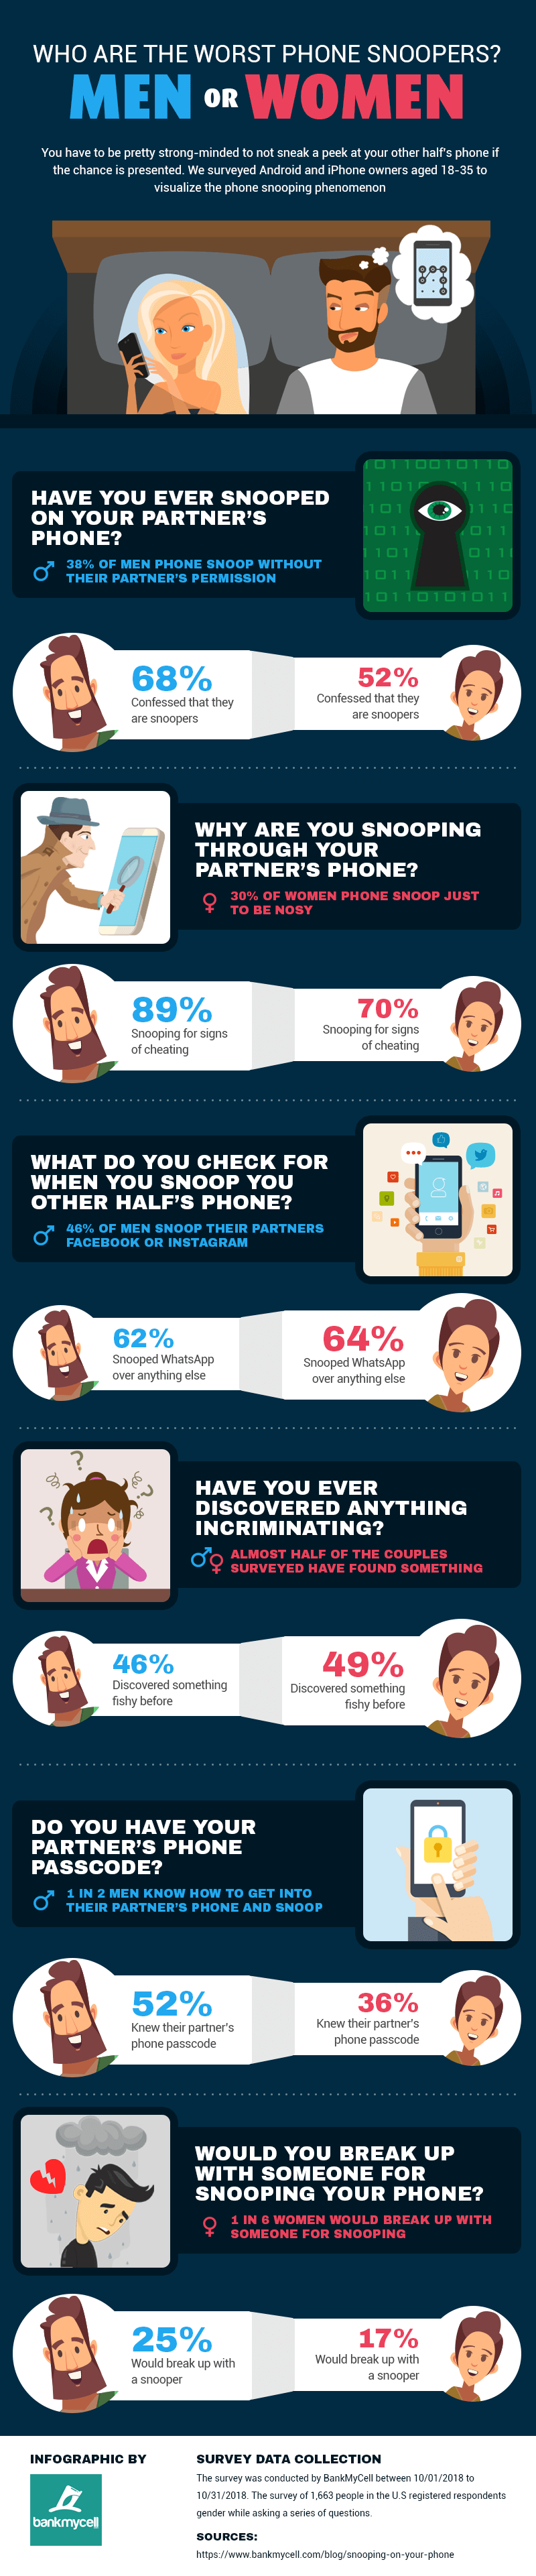 Phone snoopers by gender infographic